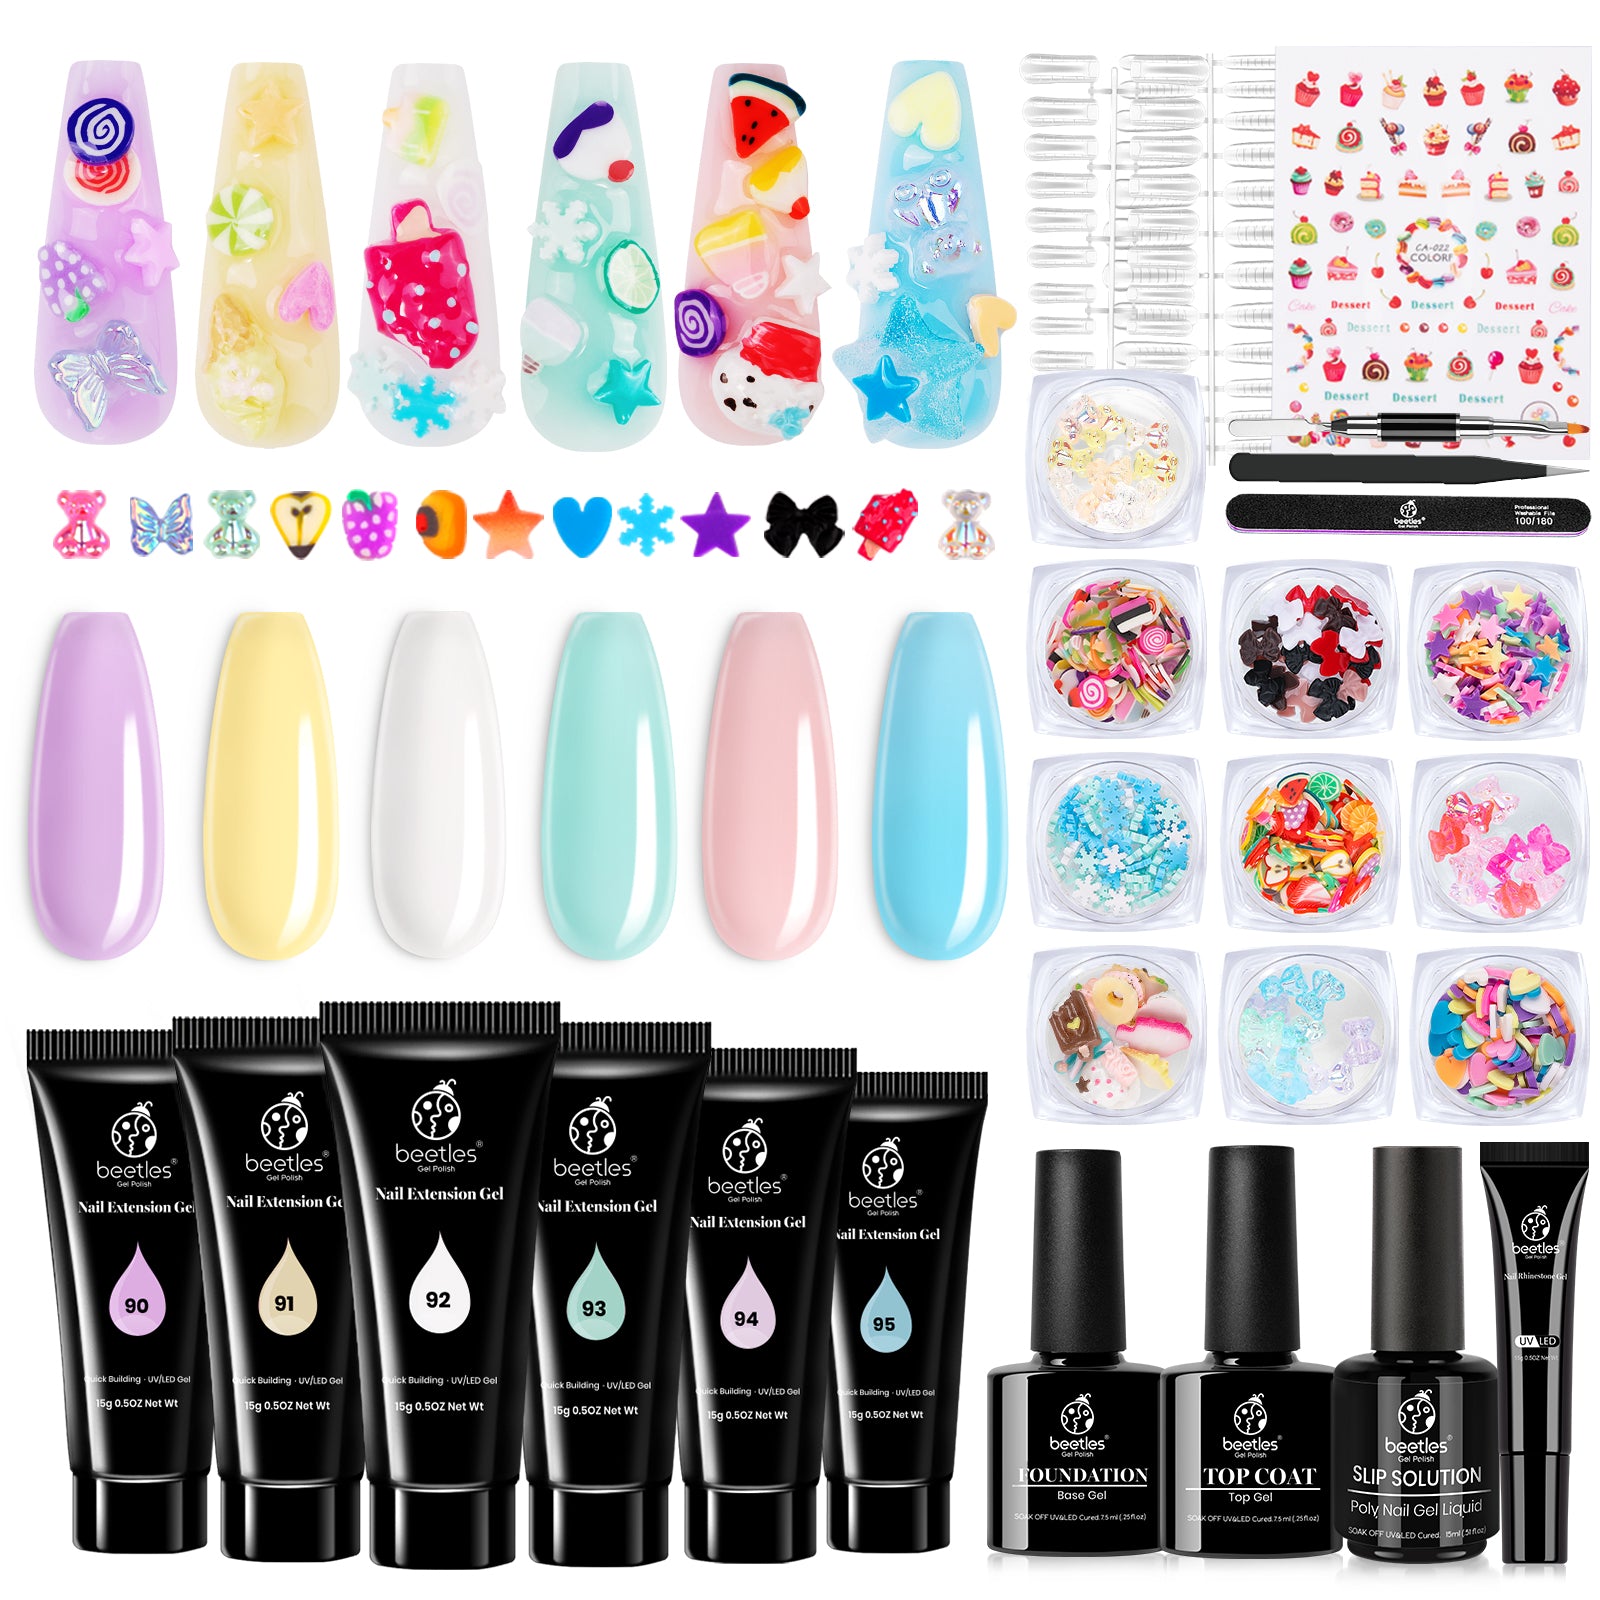 Polygel Nail Extension Kit - Live Your Expression | Nail extensions,  Polygel nails, Nail kit